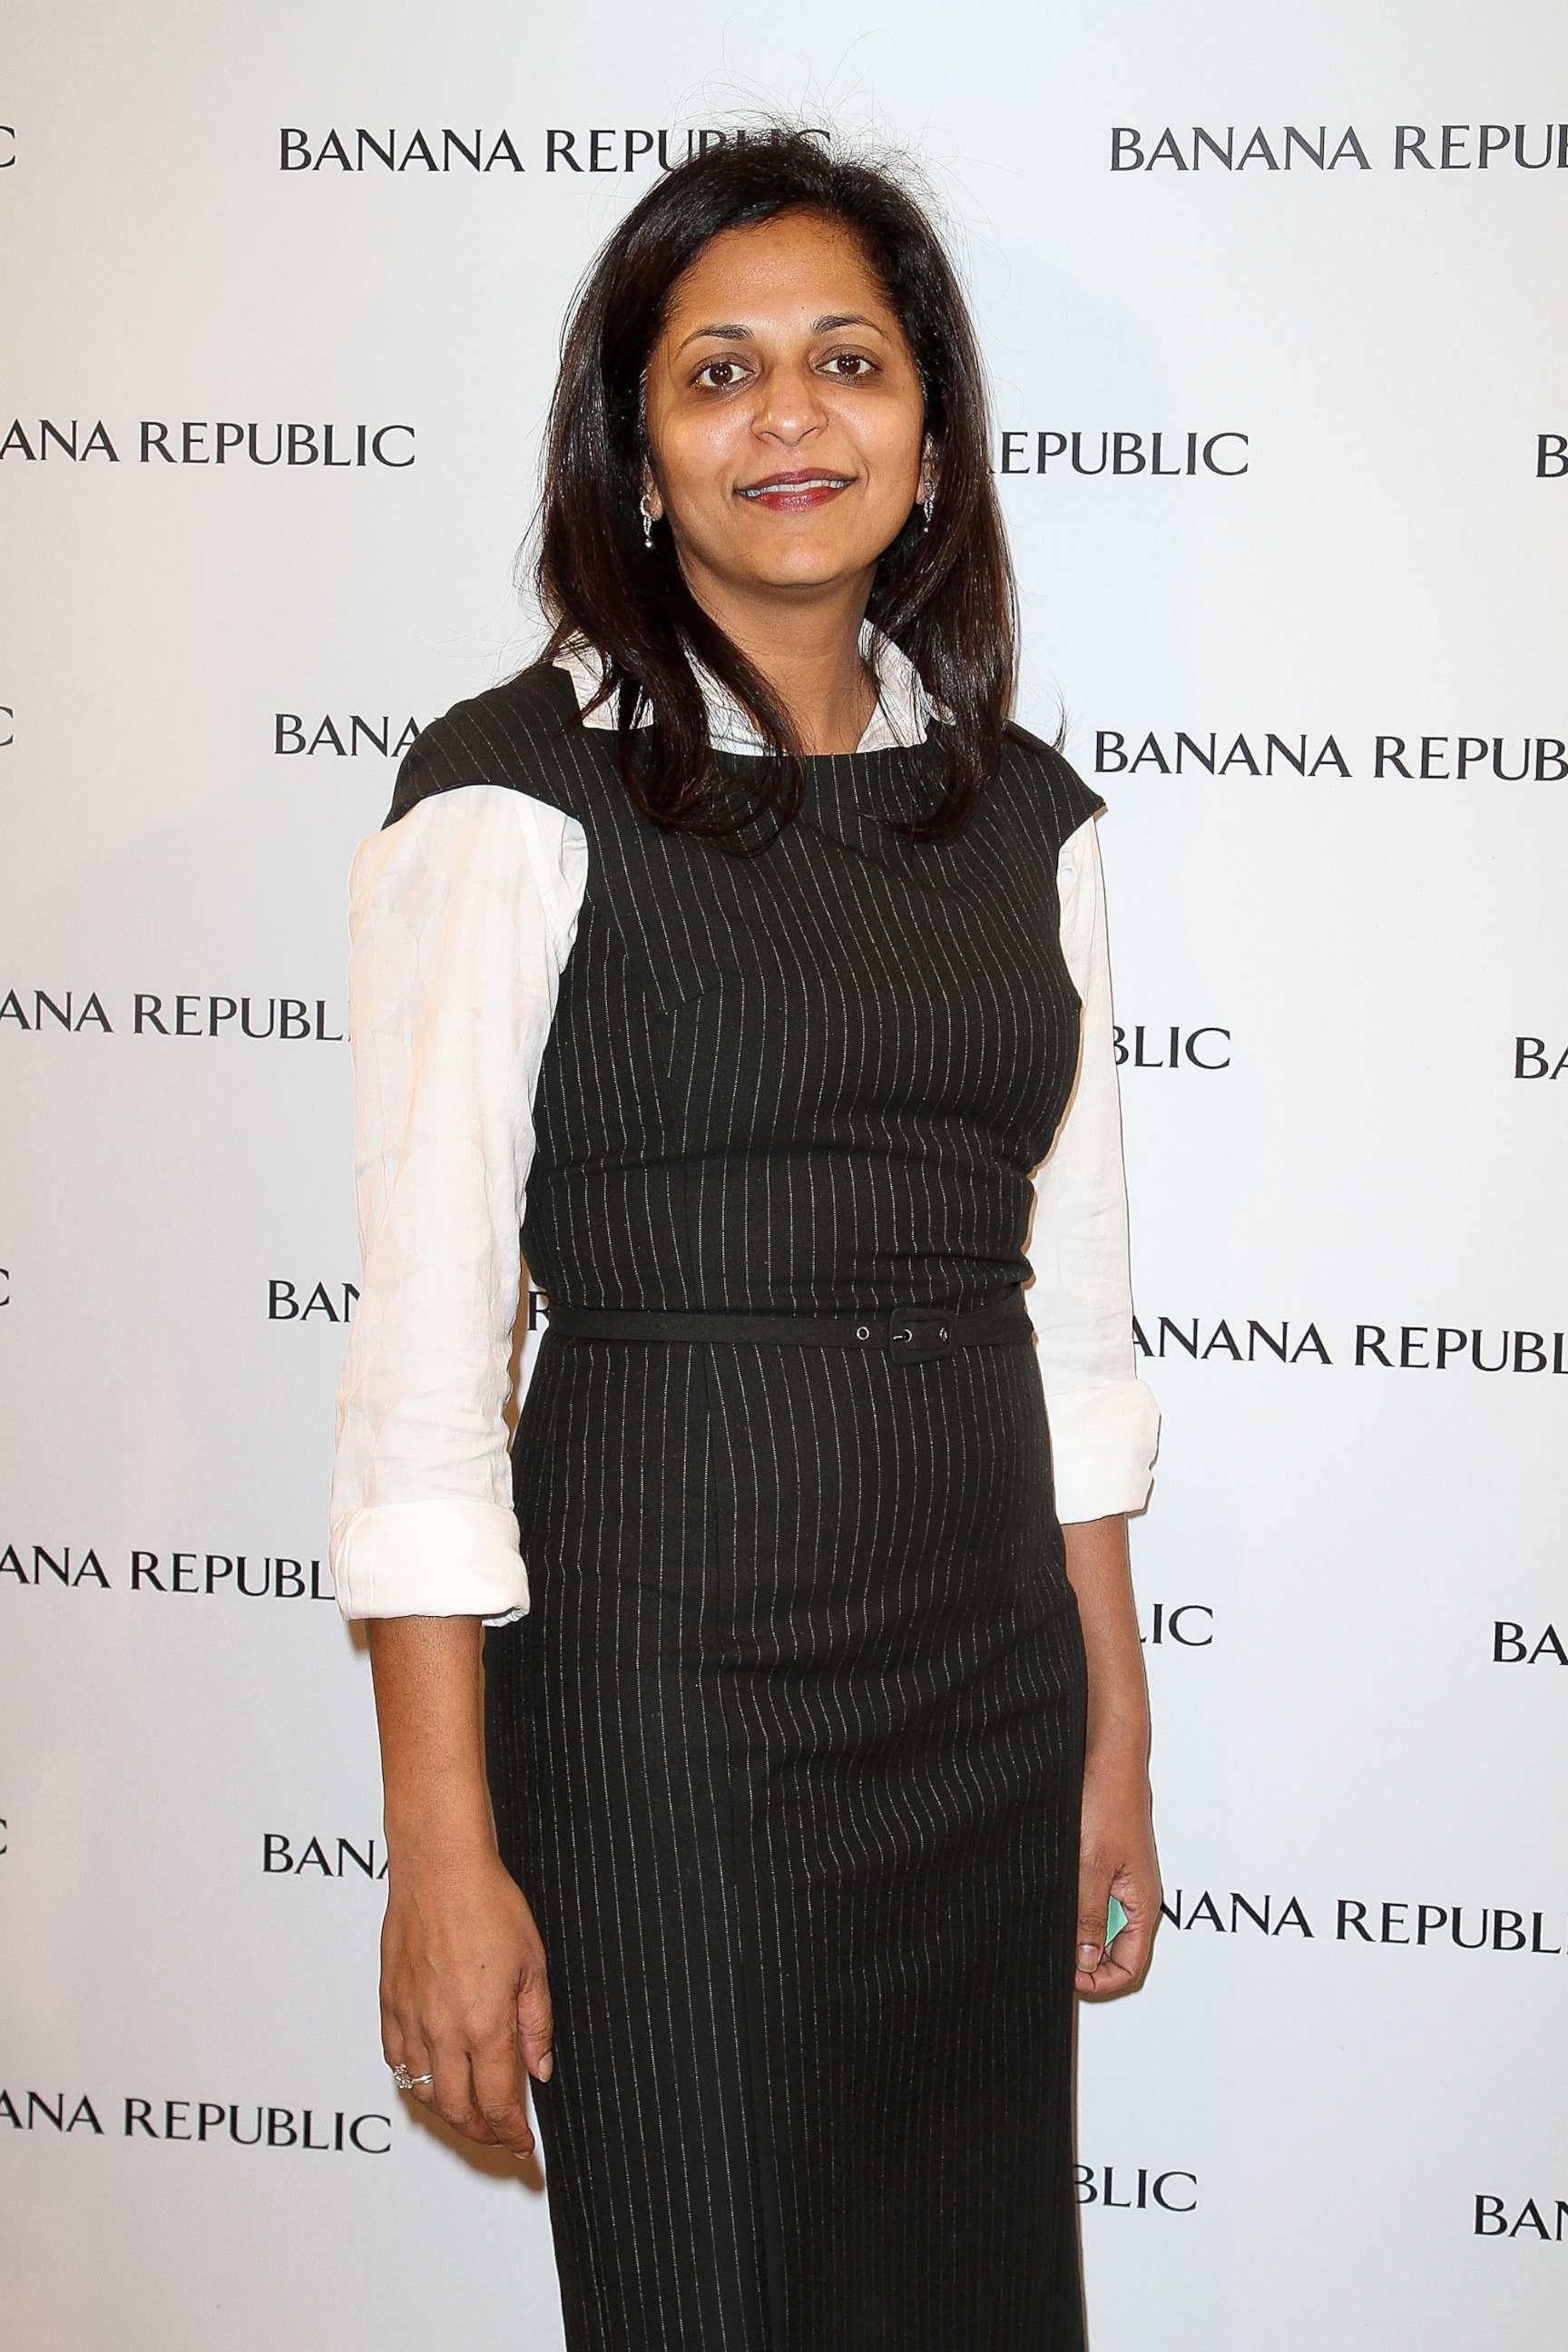 PHOTO: CEO of Old Navy, Sonia Syngal attends an event in Paris, Dec. 7, 2011.